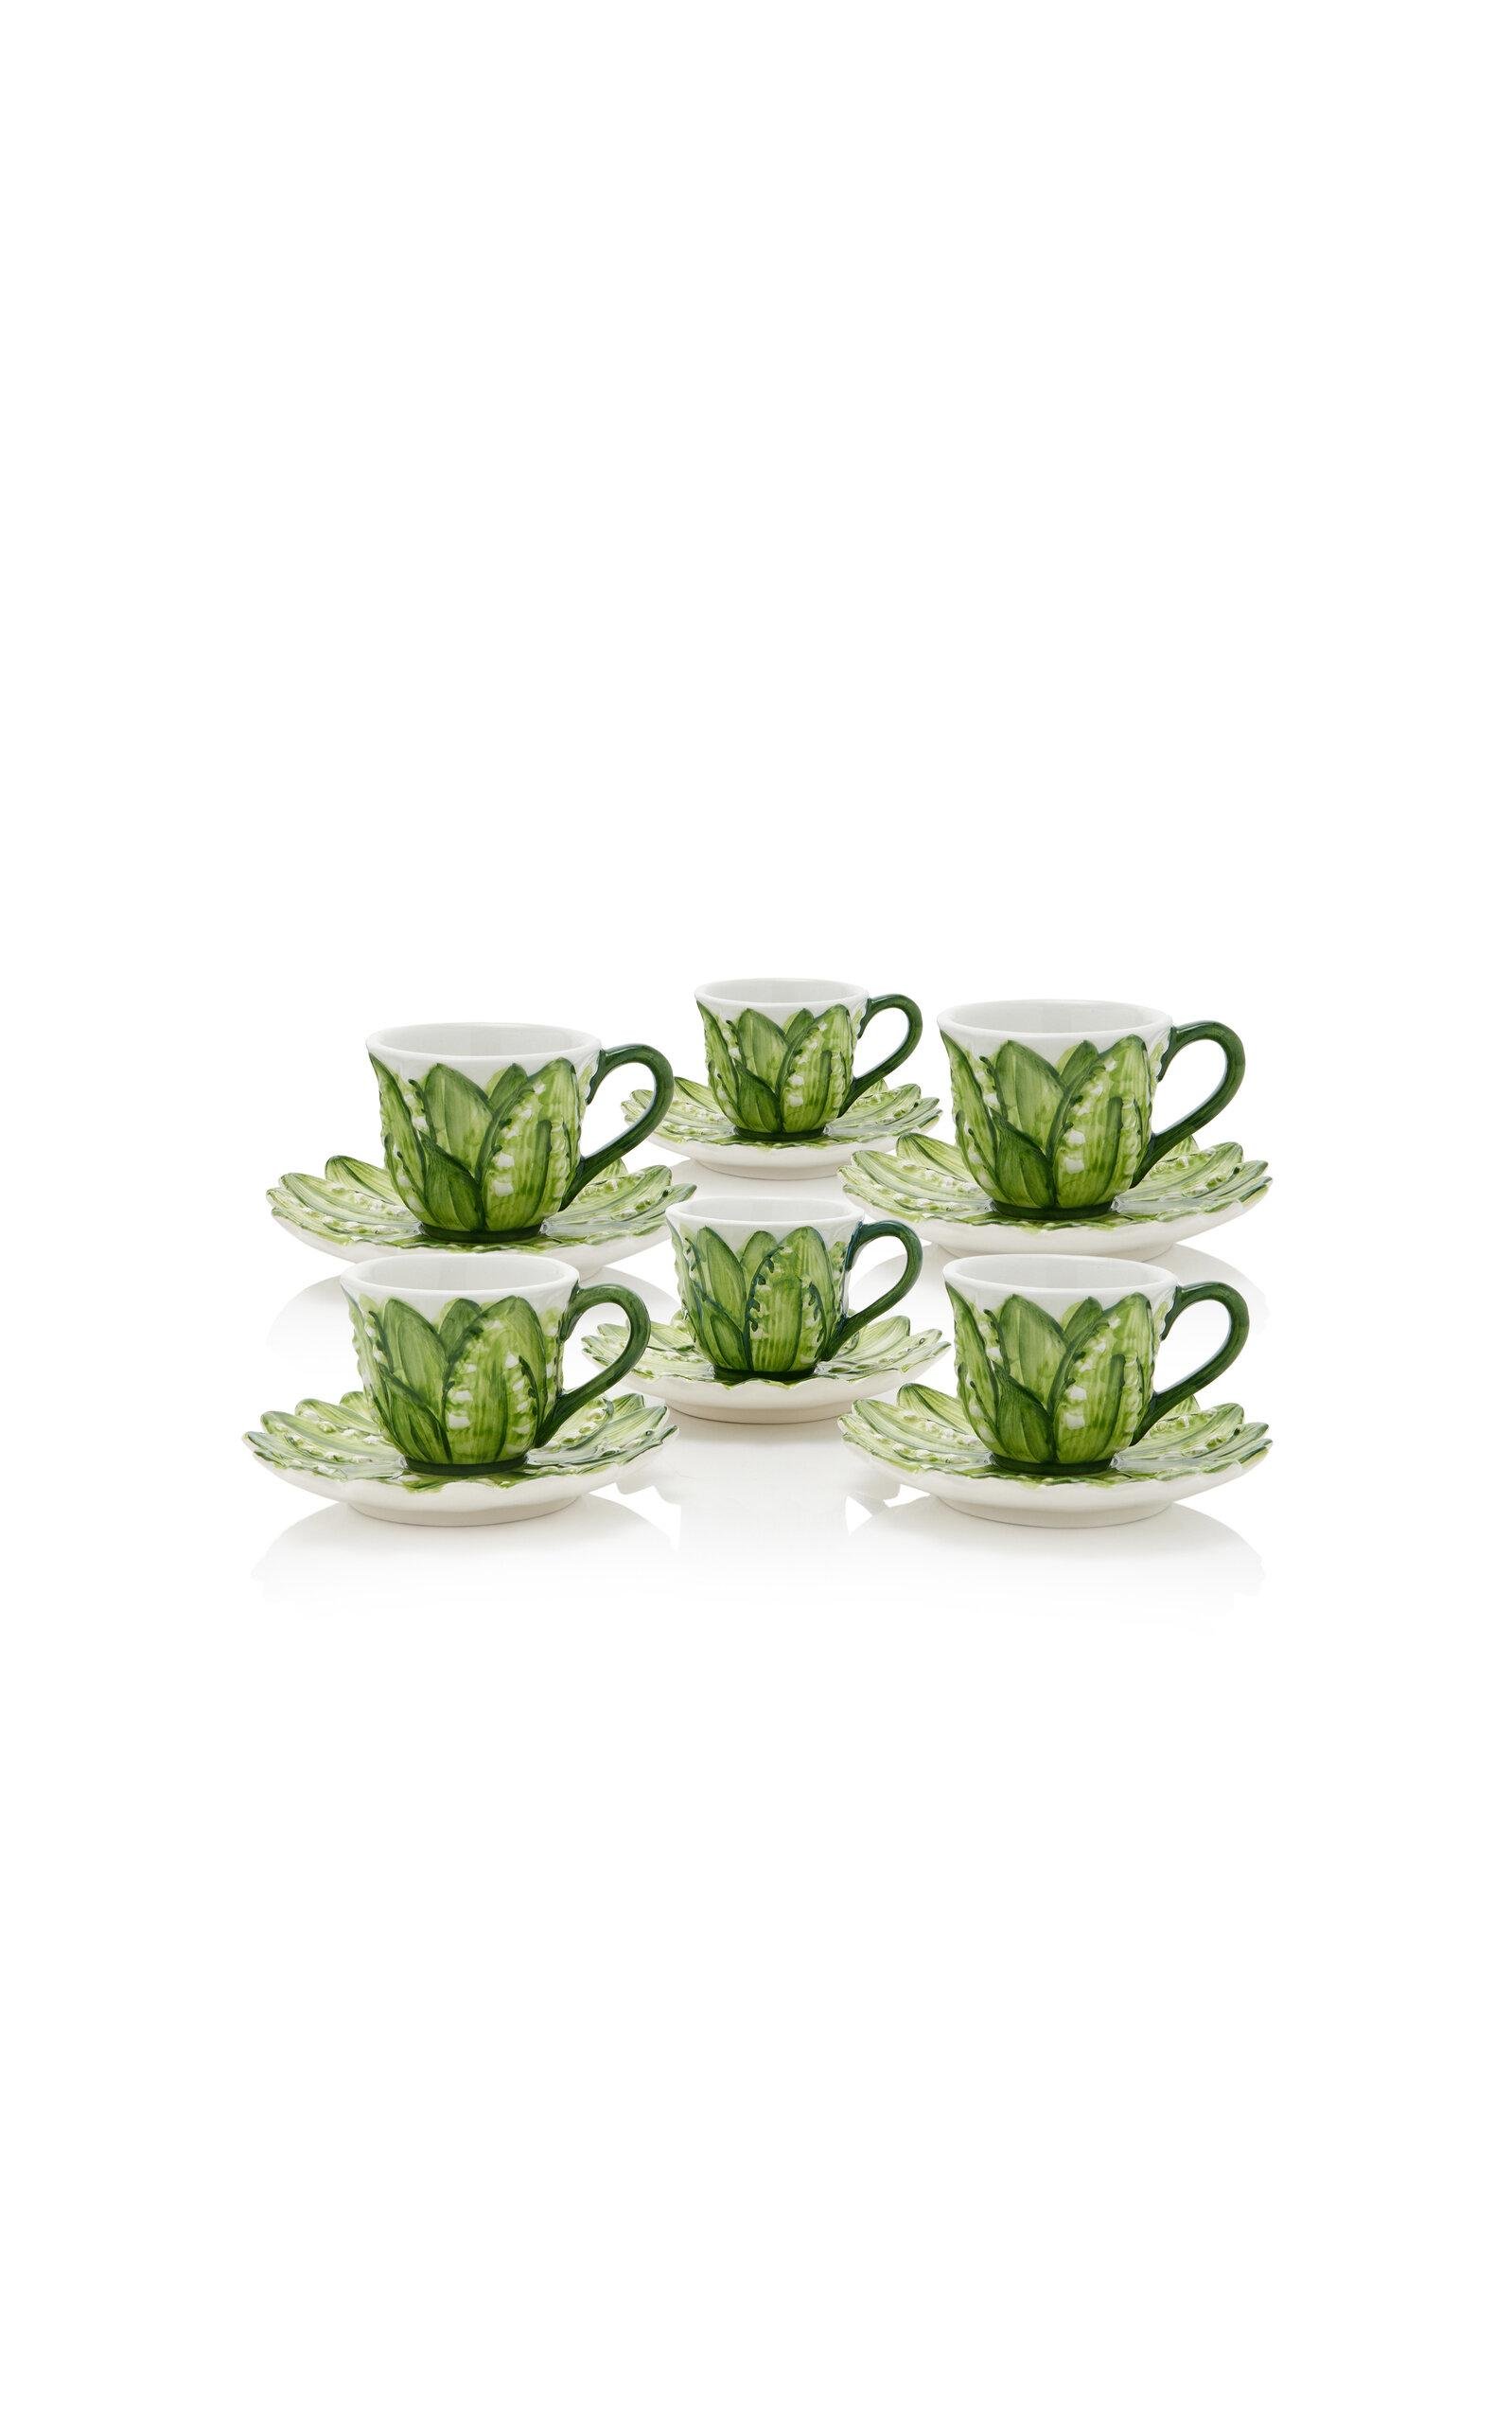 Moda Domus - Set-of-Six Hand-Painted Lily of The Valley Ceramic Espresso Cup and Saucer - Green - Moda Operandi by MODA DOMUS